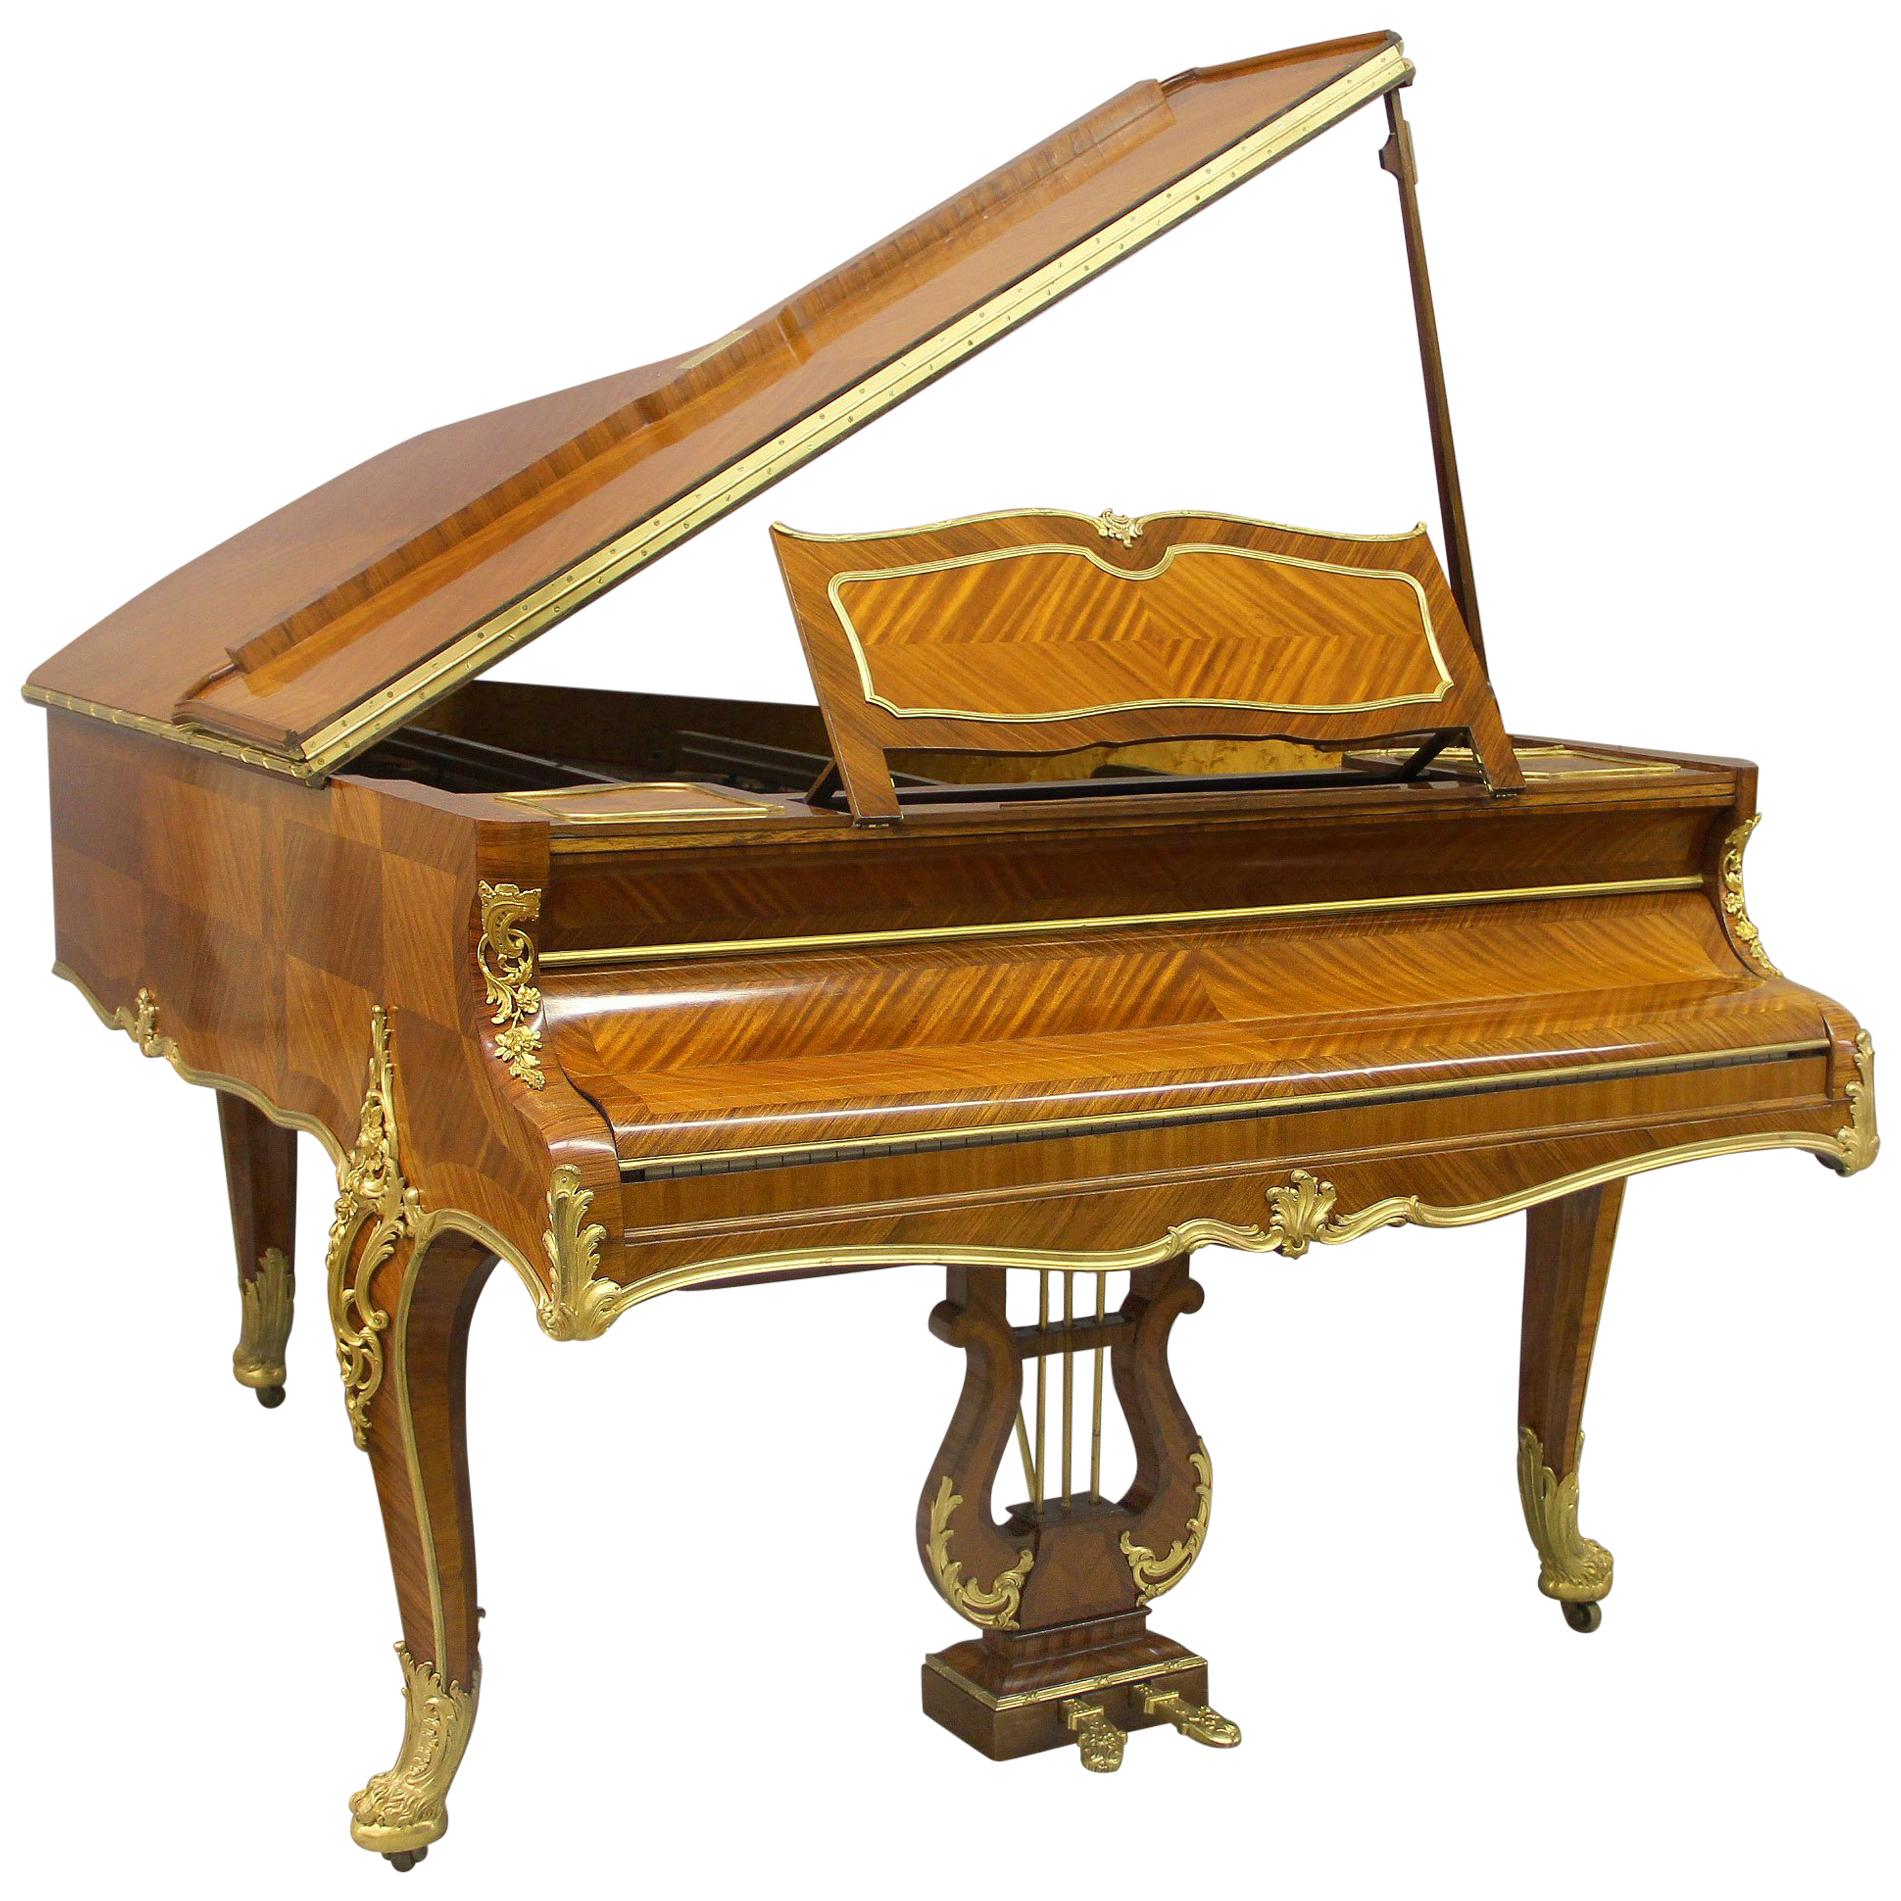 Fine Early 20th Century Gilt Bronze Mounted Grand Erard Piano by François Linke For Sale